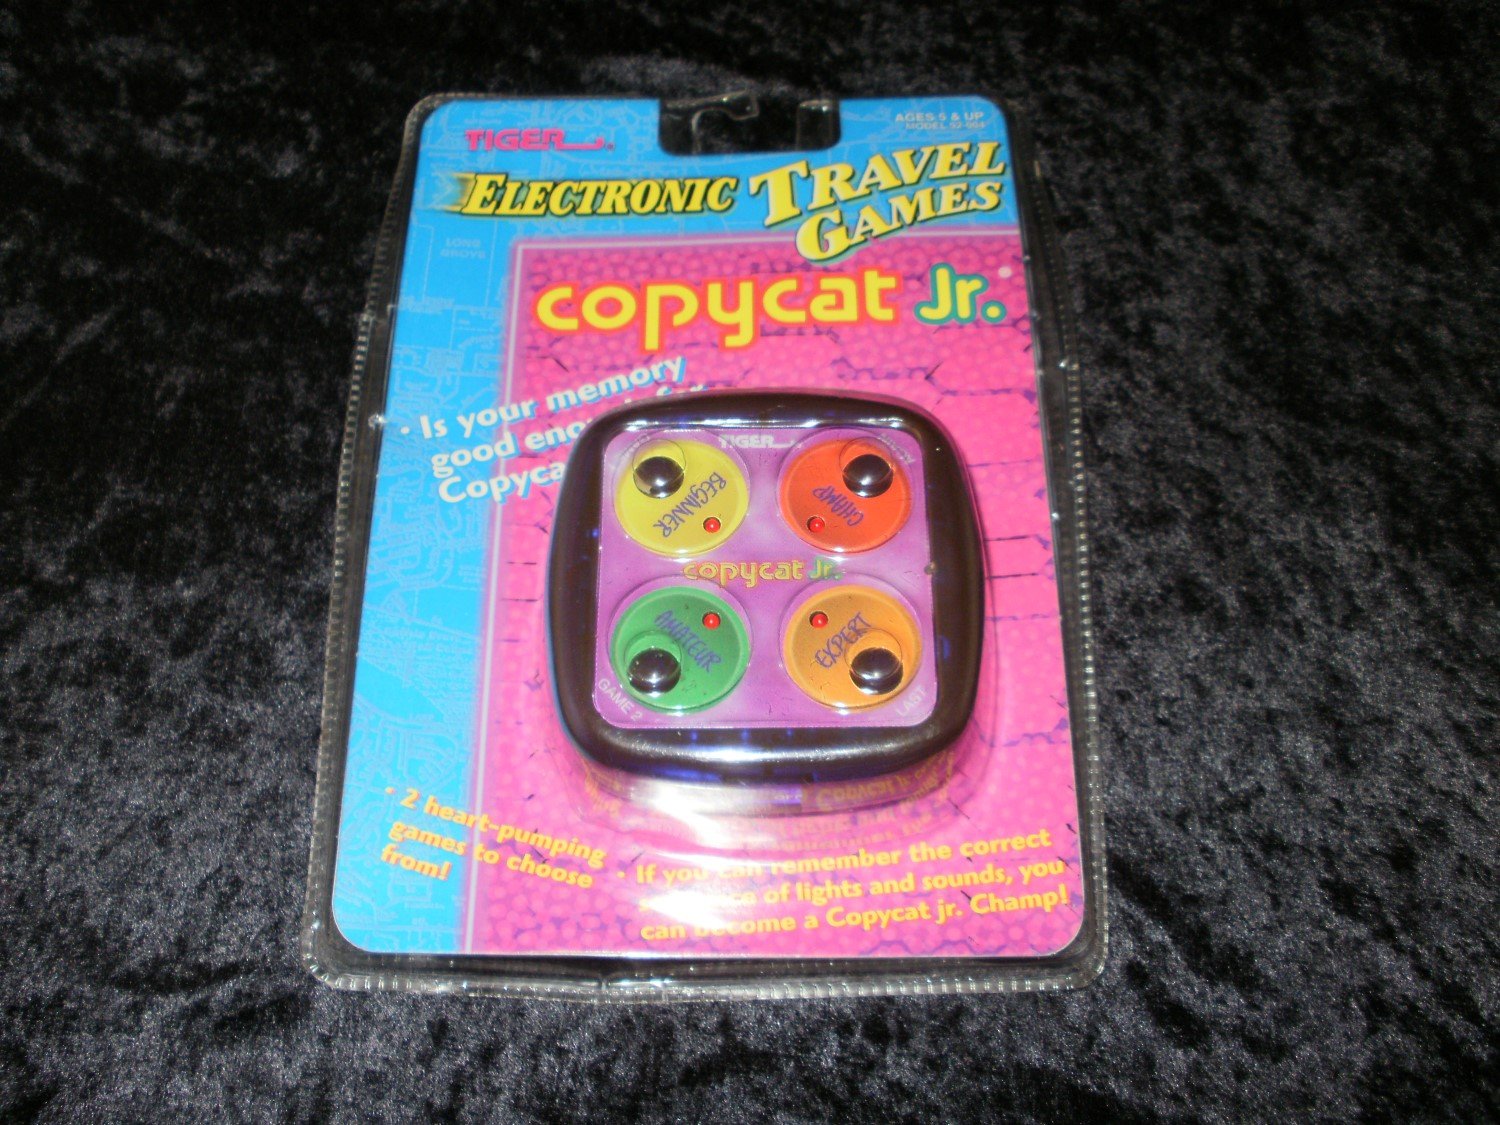 download tiger electronics lights out